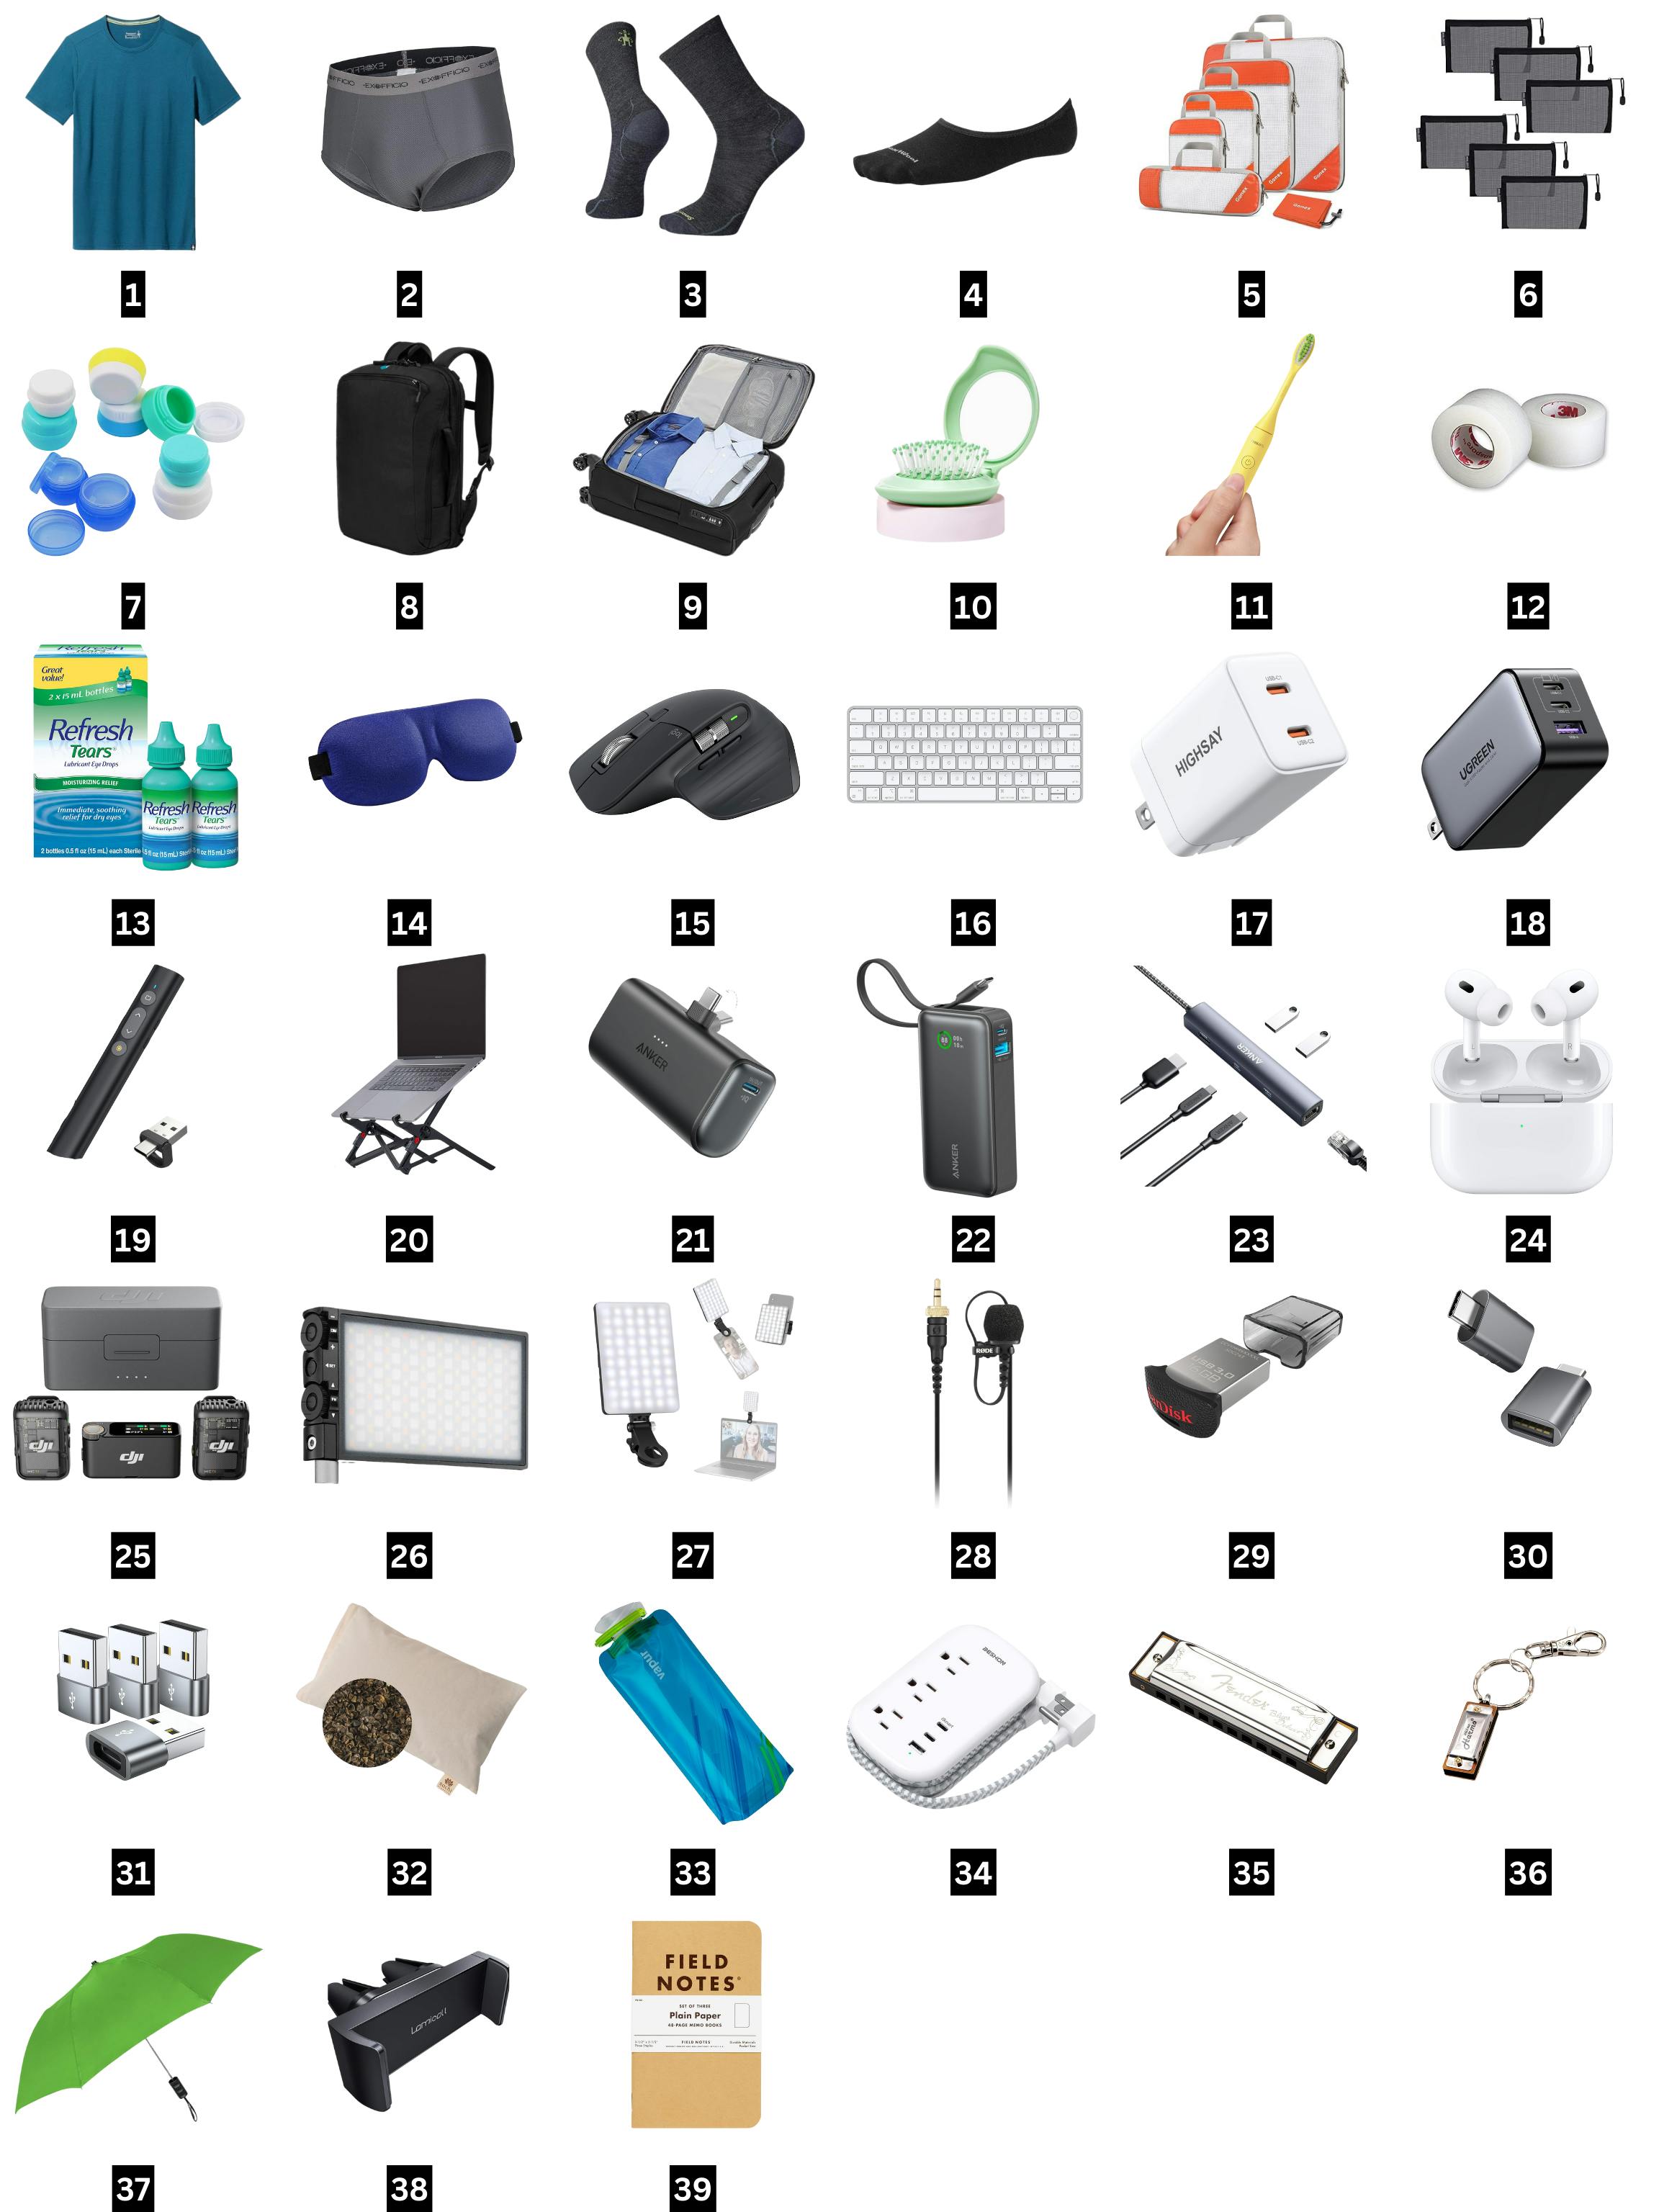 grid photo of all the items from Nick Gray's travel gear list